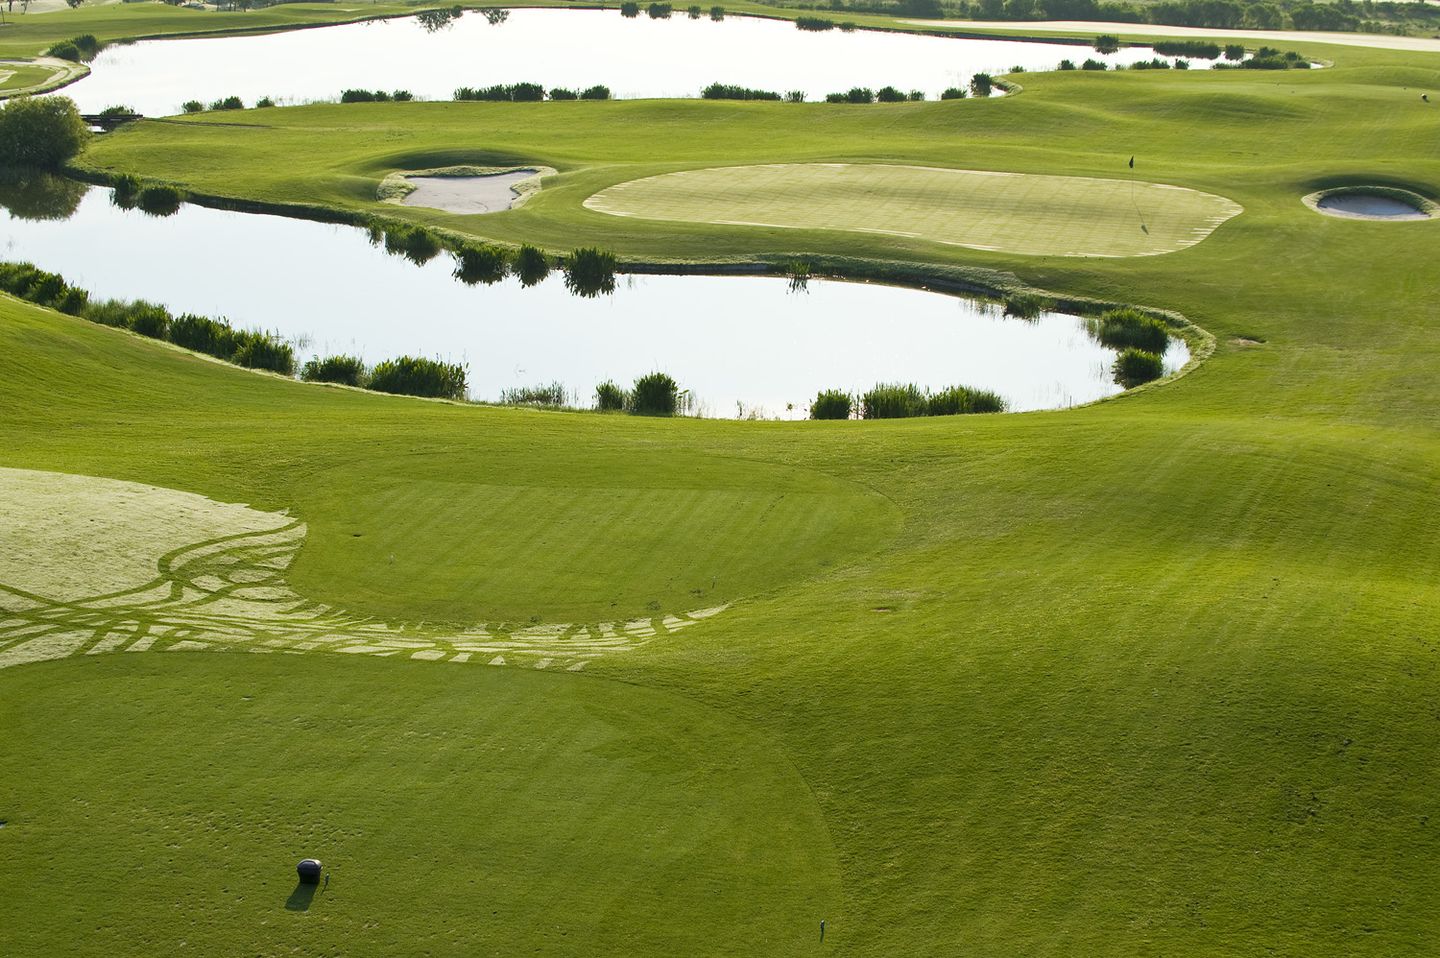 Lakes surrounded by the golf course